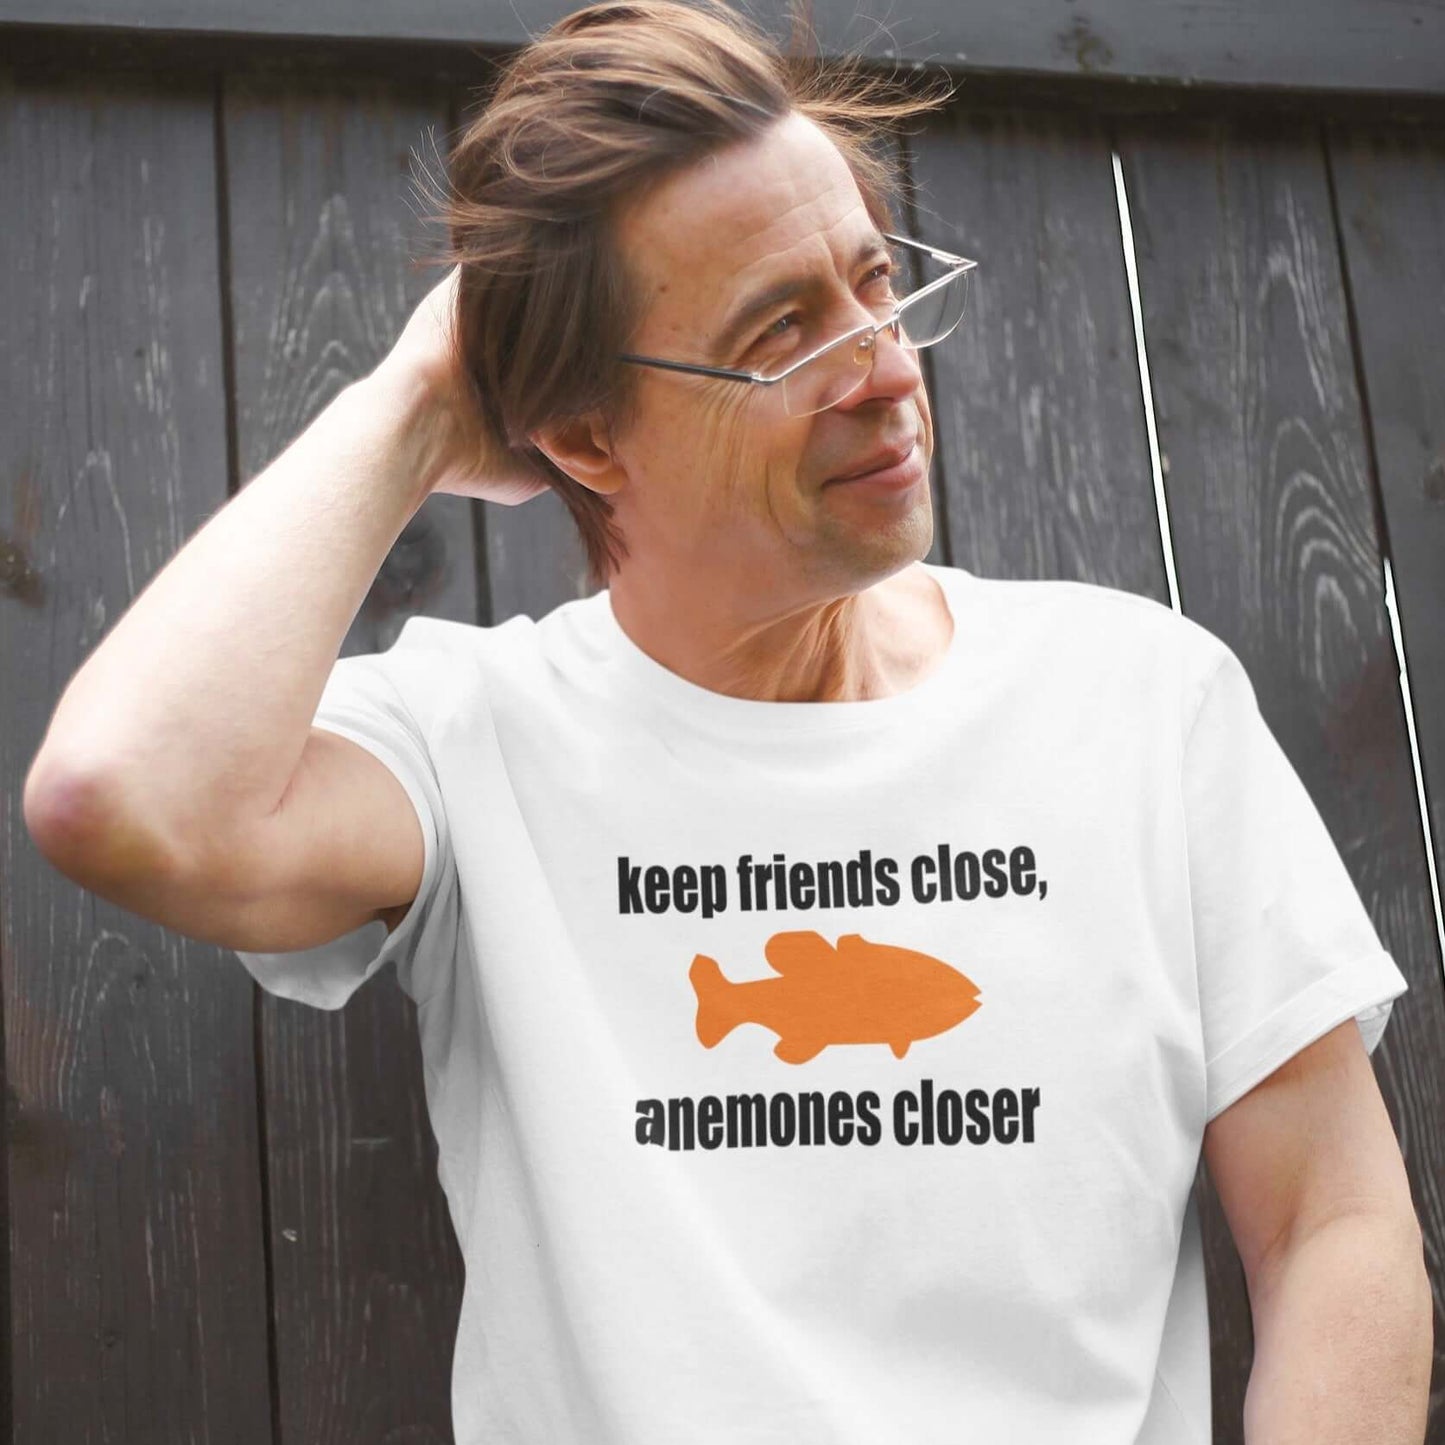 Man wearing white t-shirt with the pun phrase Keep friends close, anemones closer with an image of an orange fish.